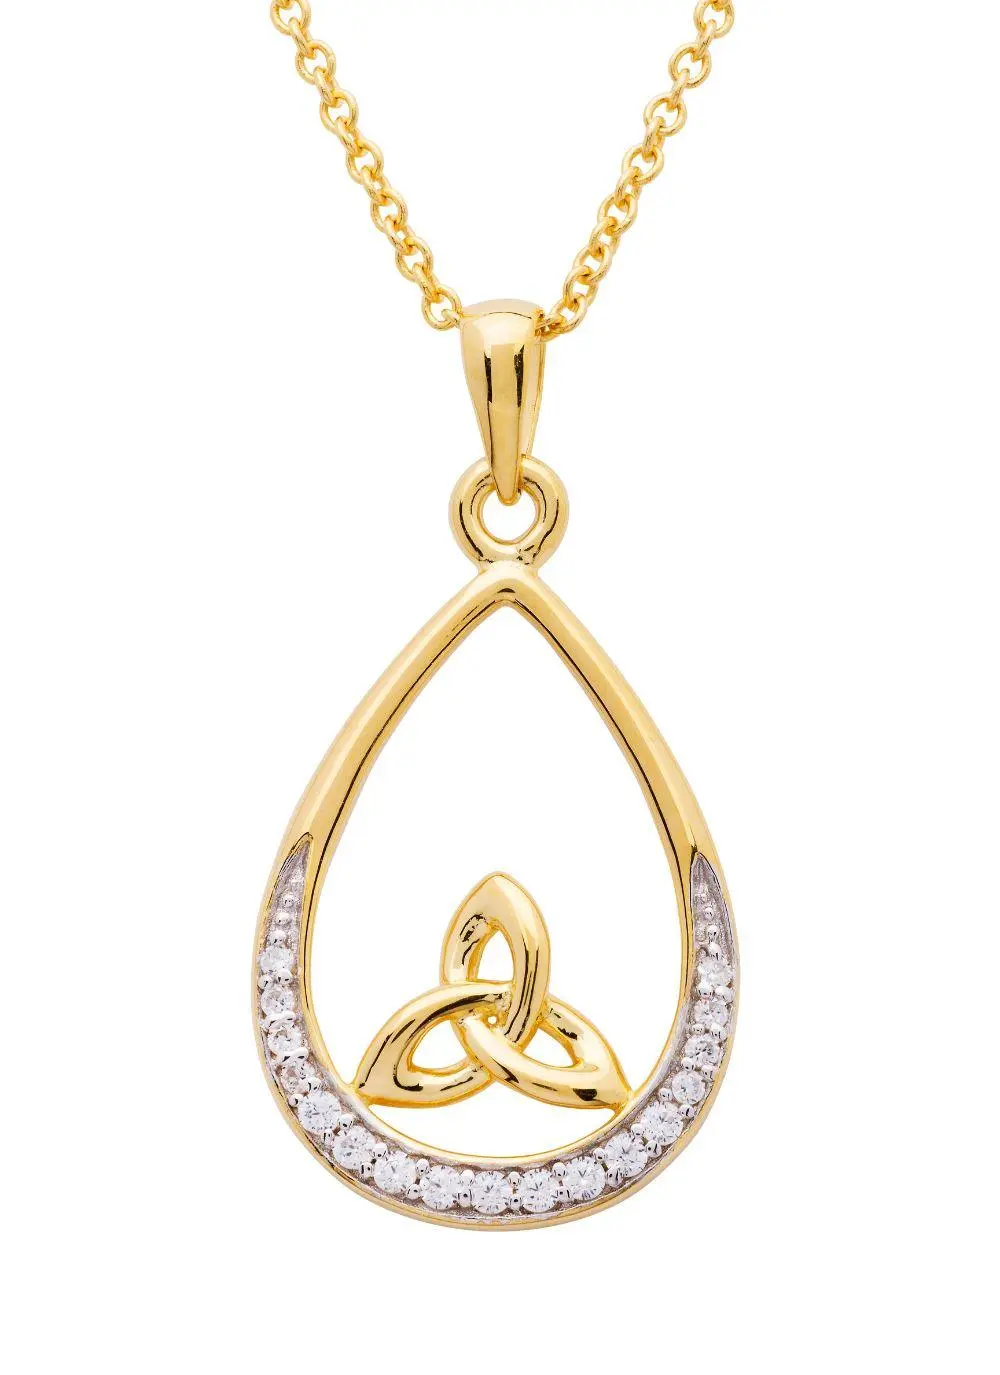 White background cut out shot of 14Ct Gold Vermeil Trinity Knot Tear Drop Pendant